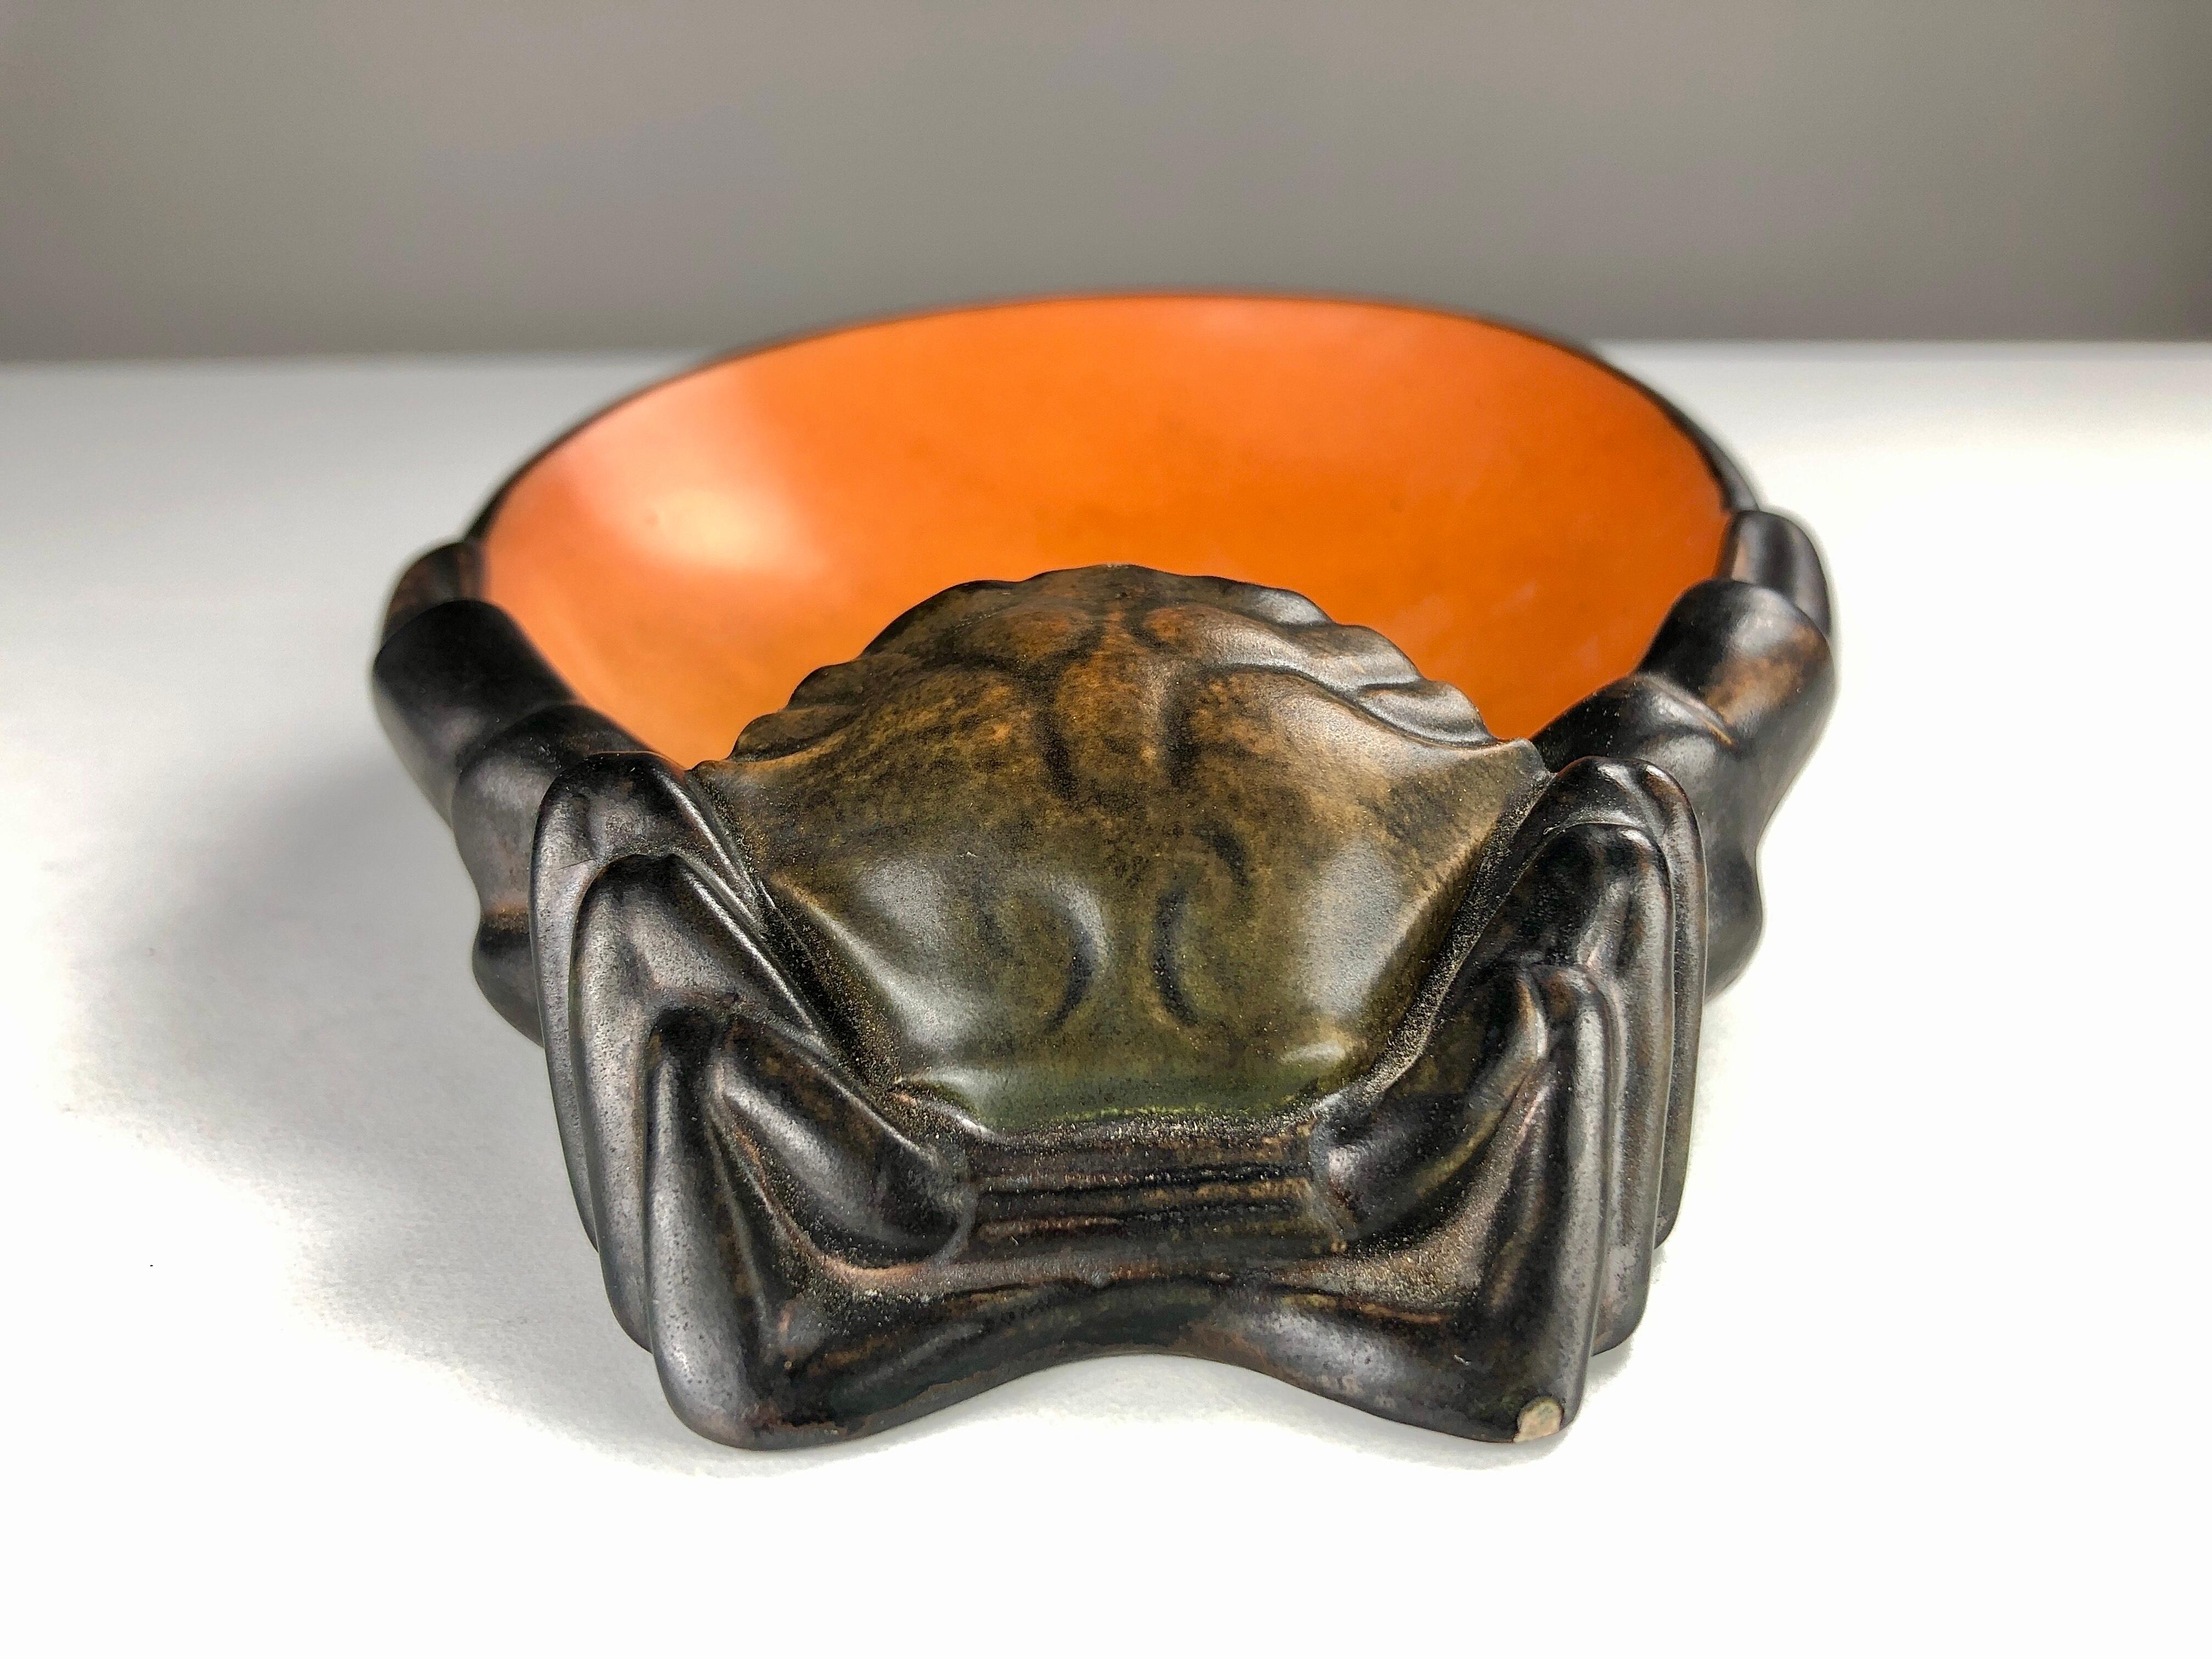 Danish Hand-Crafted Art Nouveau Ash Tray / Bowl by Georg Jensen for Ipsens Enke For Sale 1